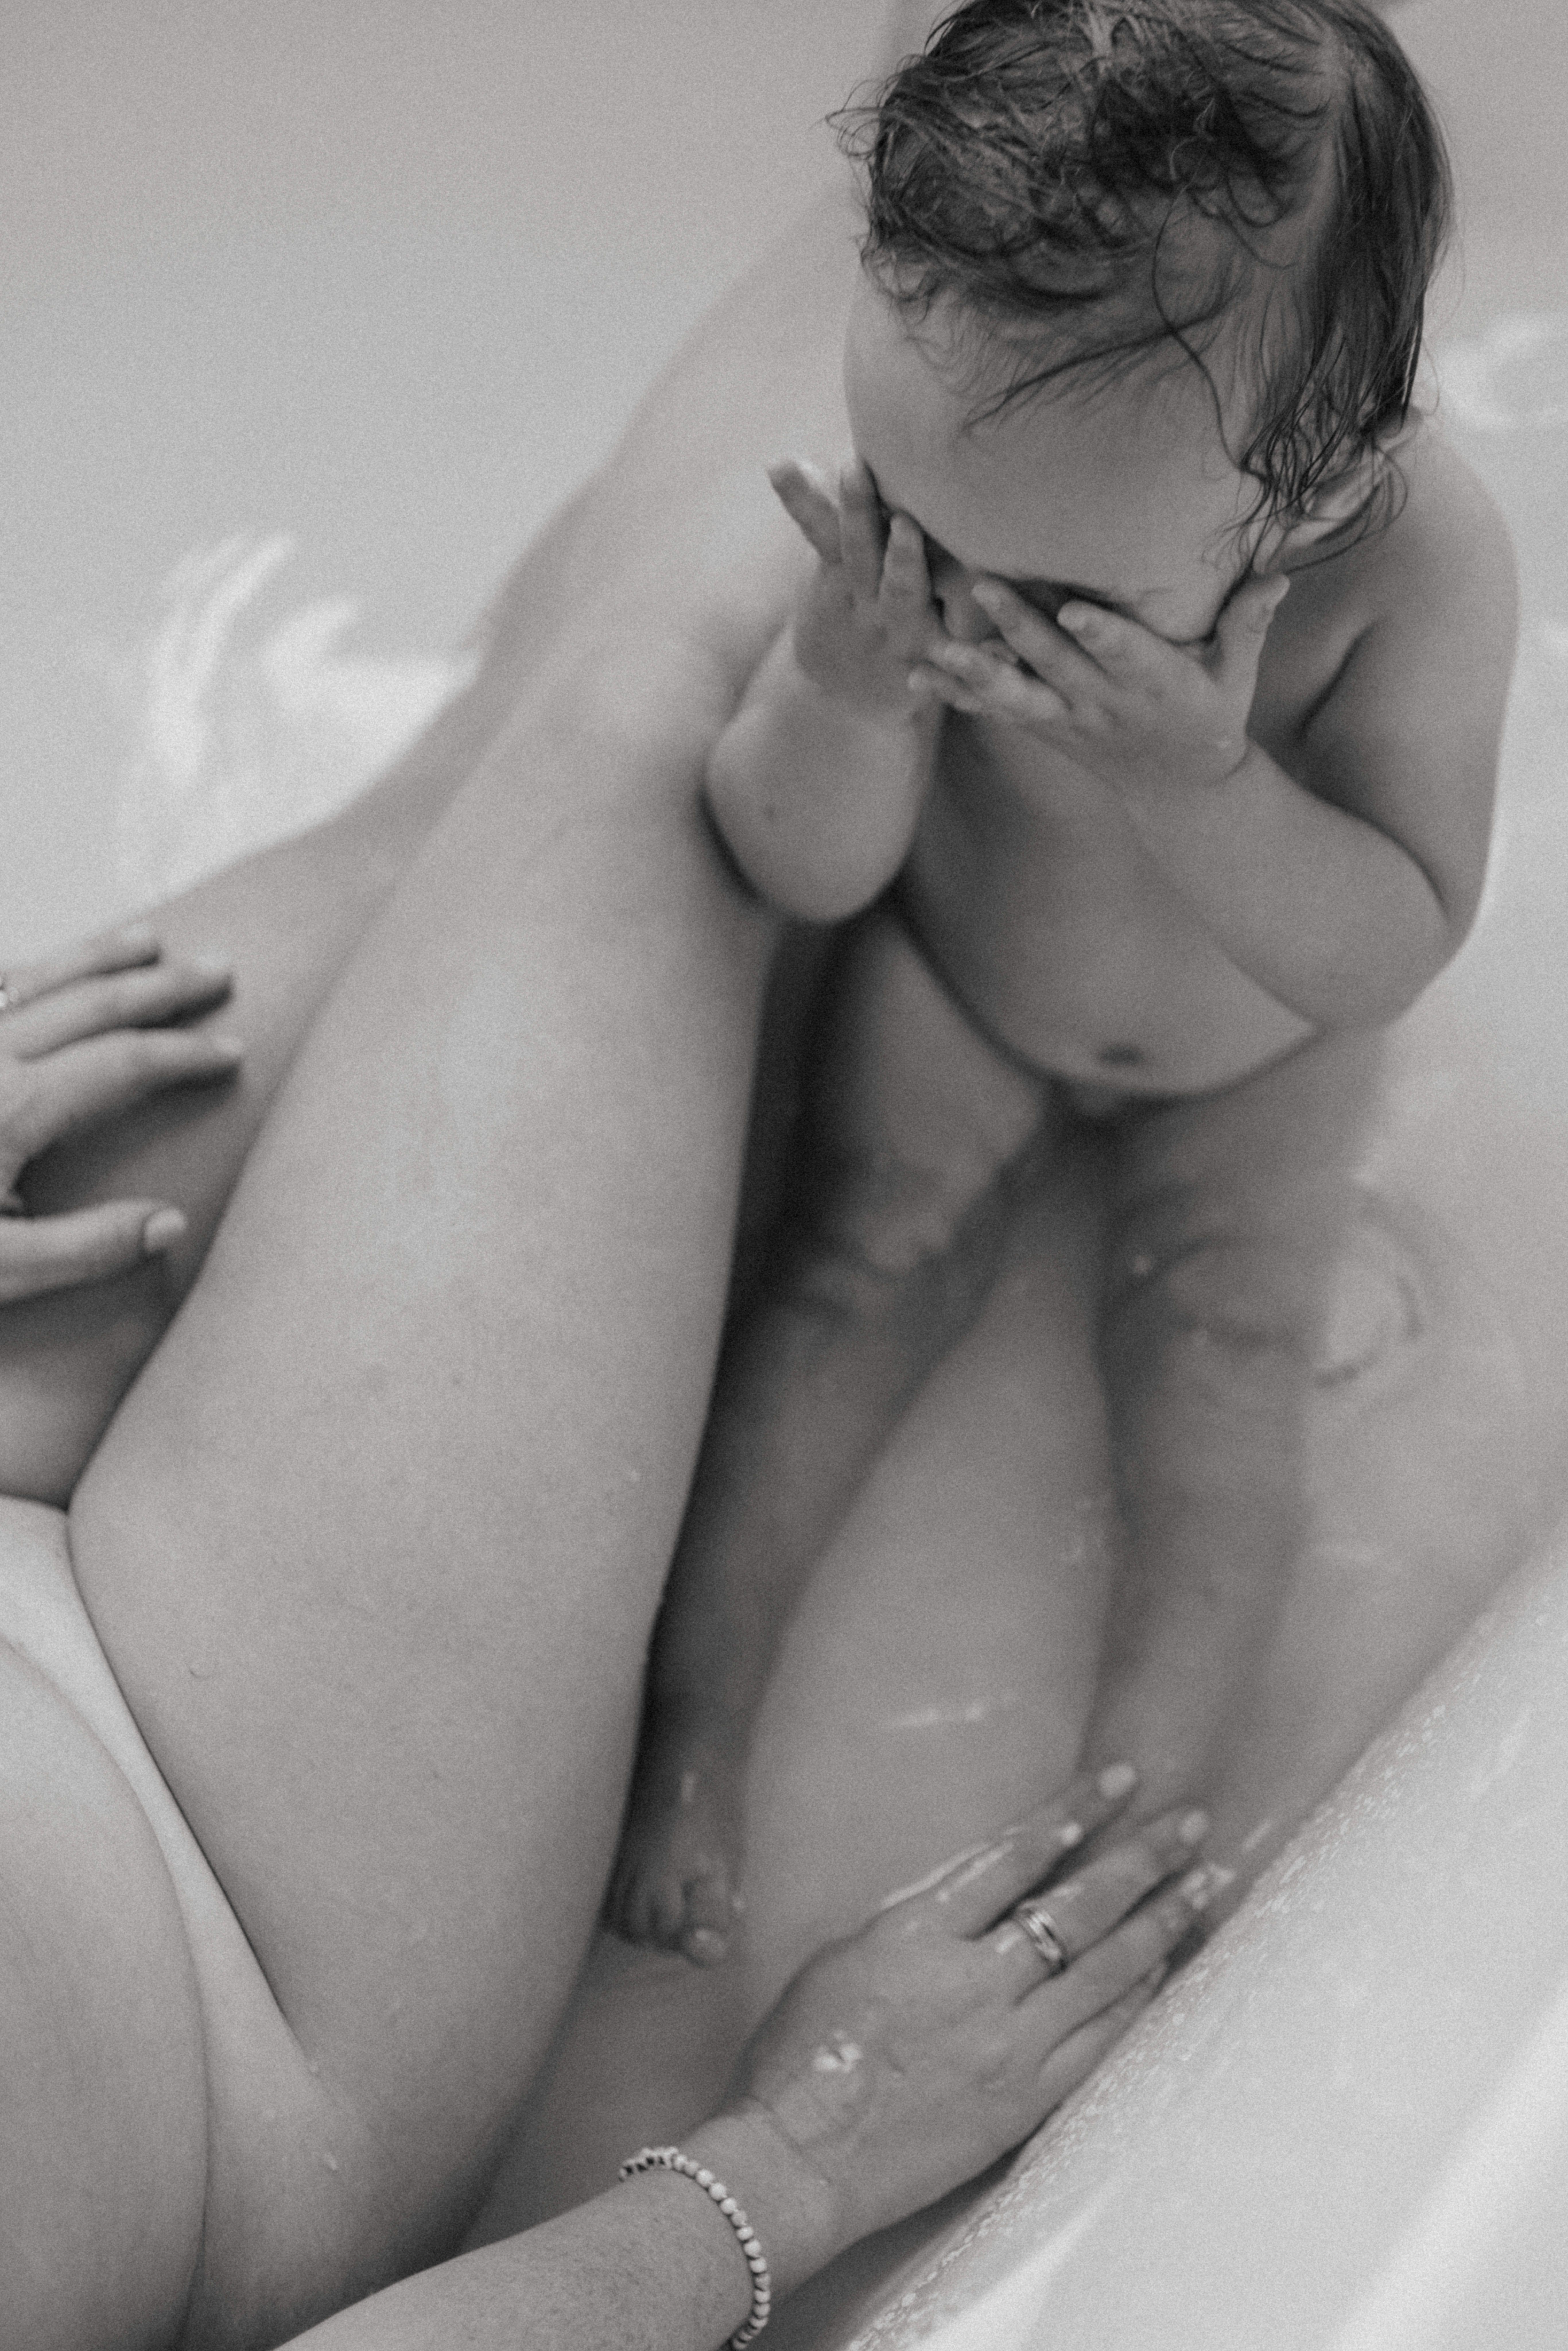 mother and baby taking a bath and baby covering her eyes